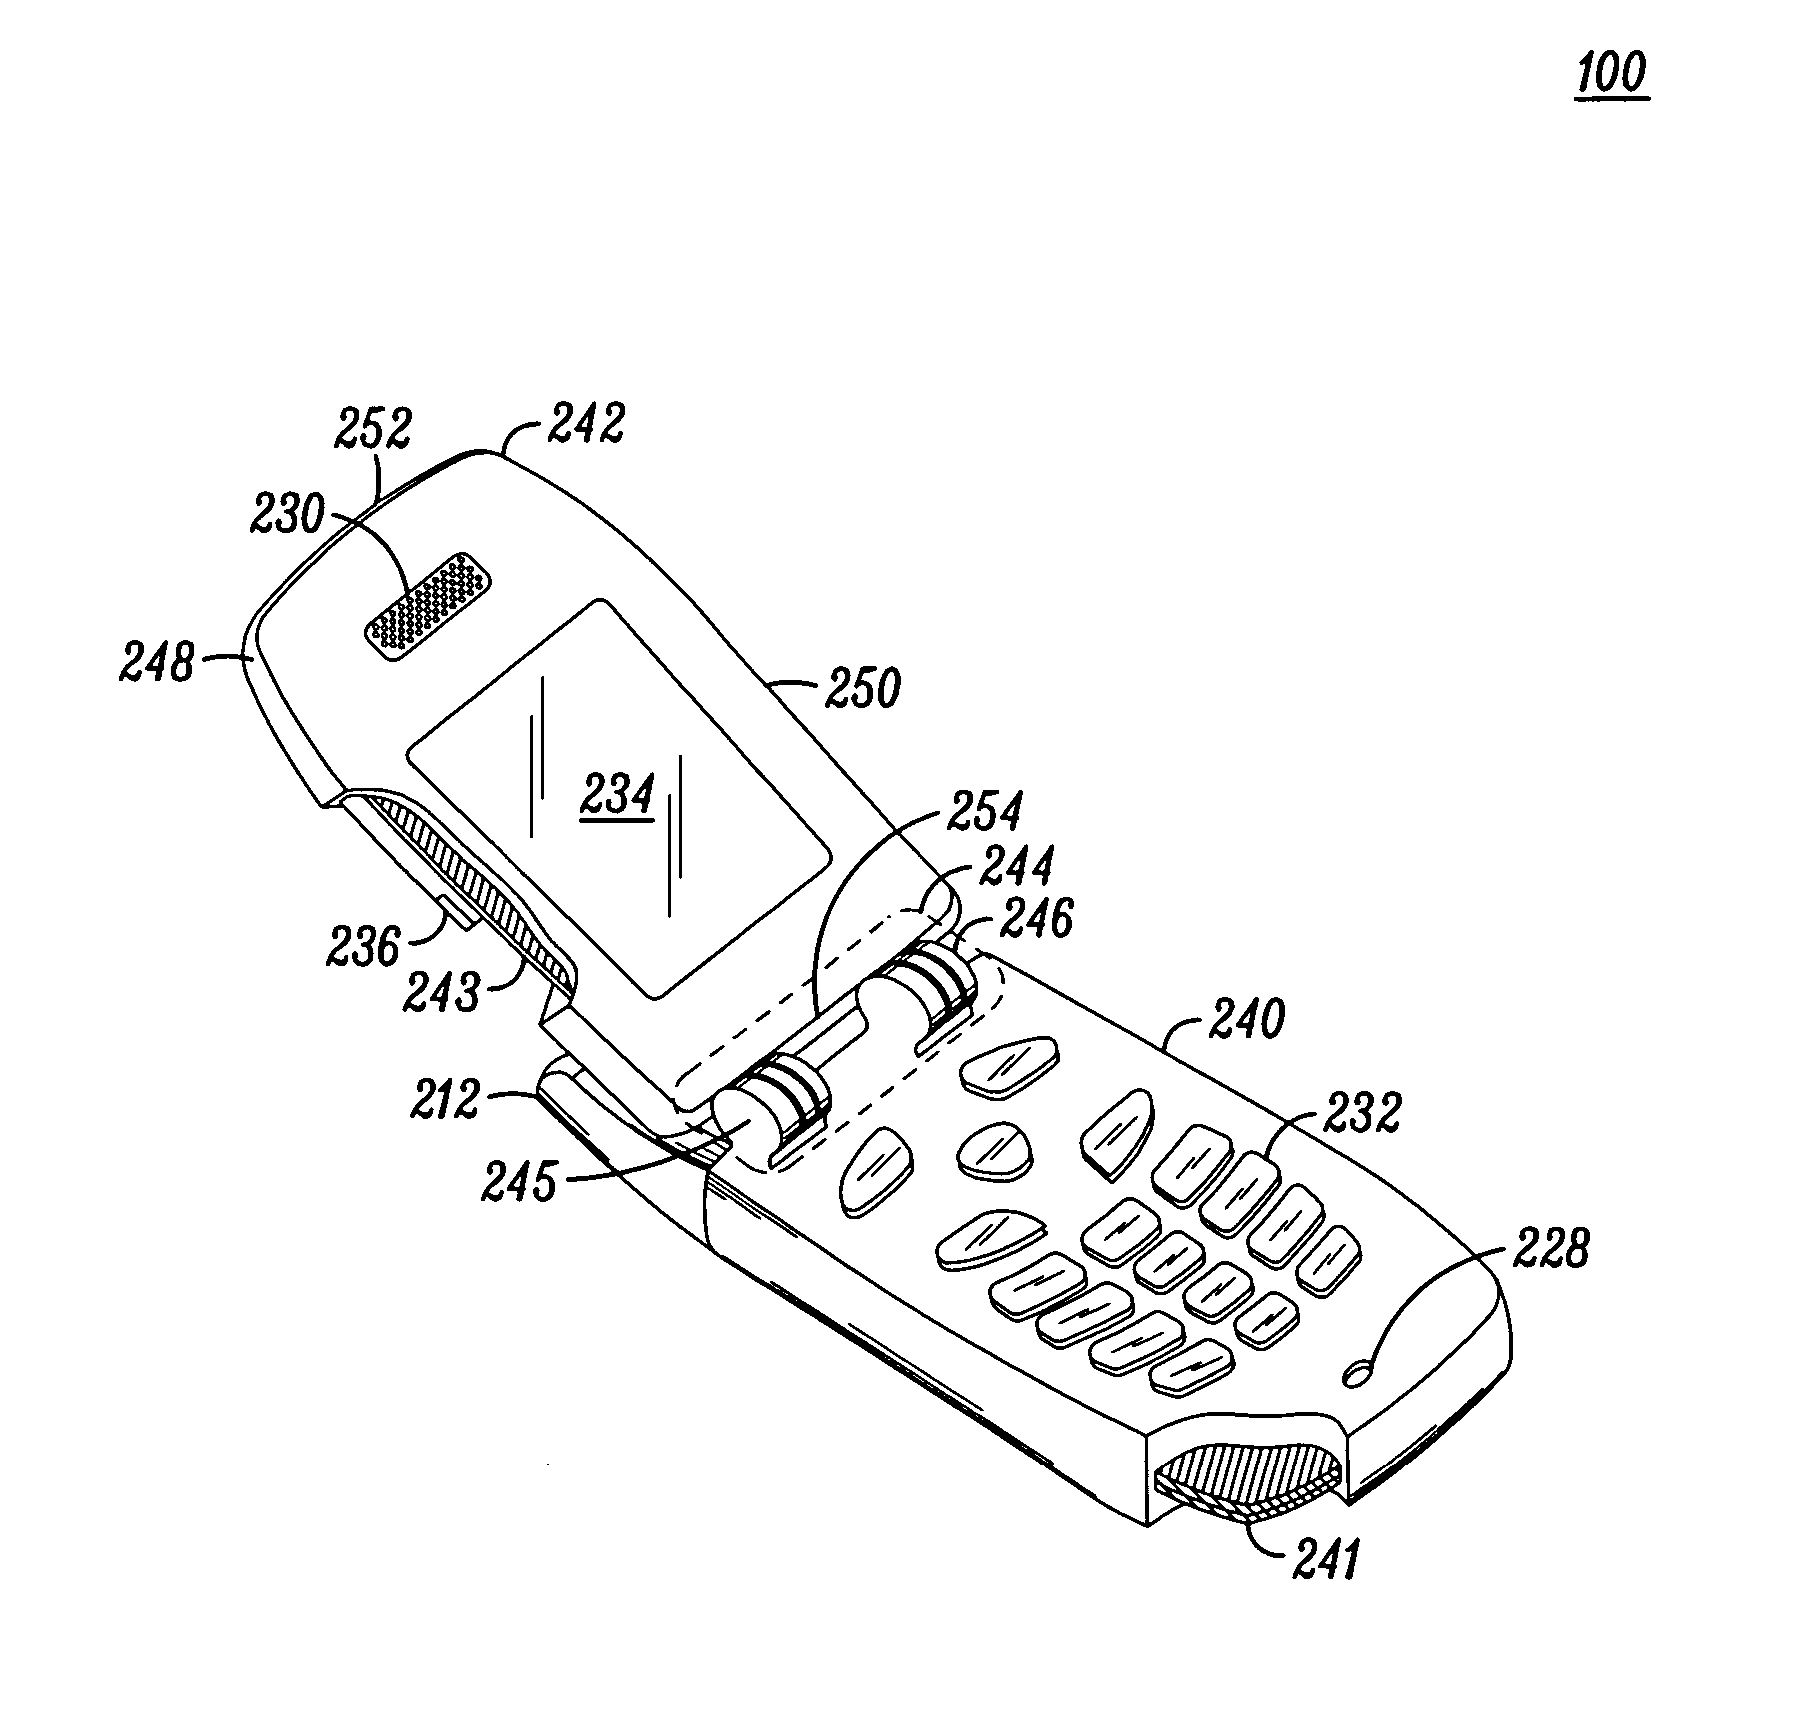 Portable communication device with global positioning system antenna